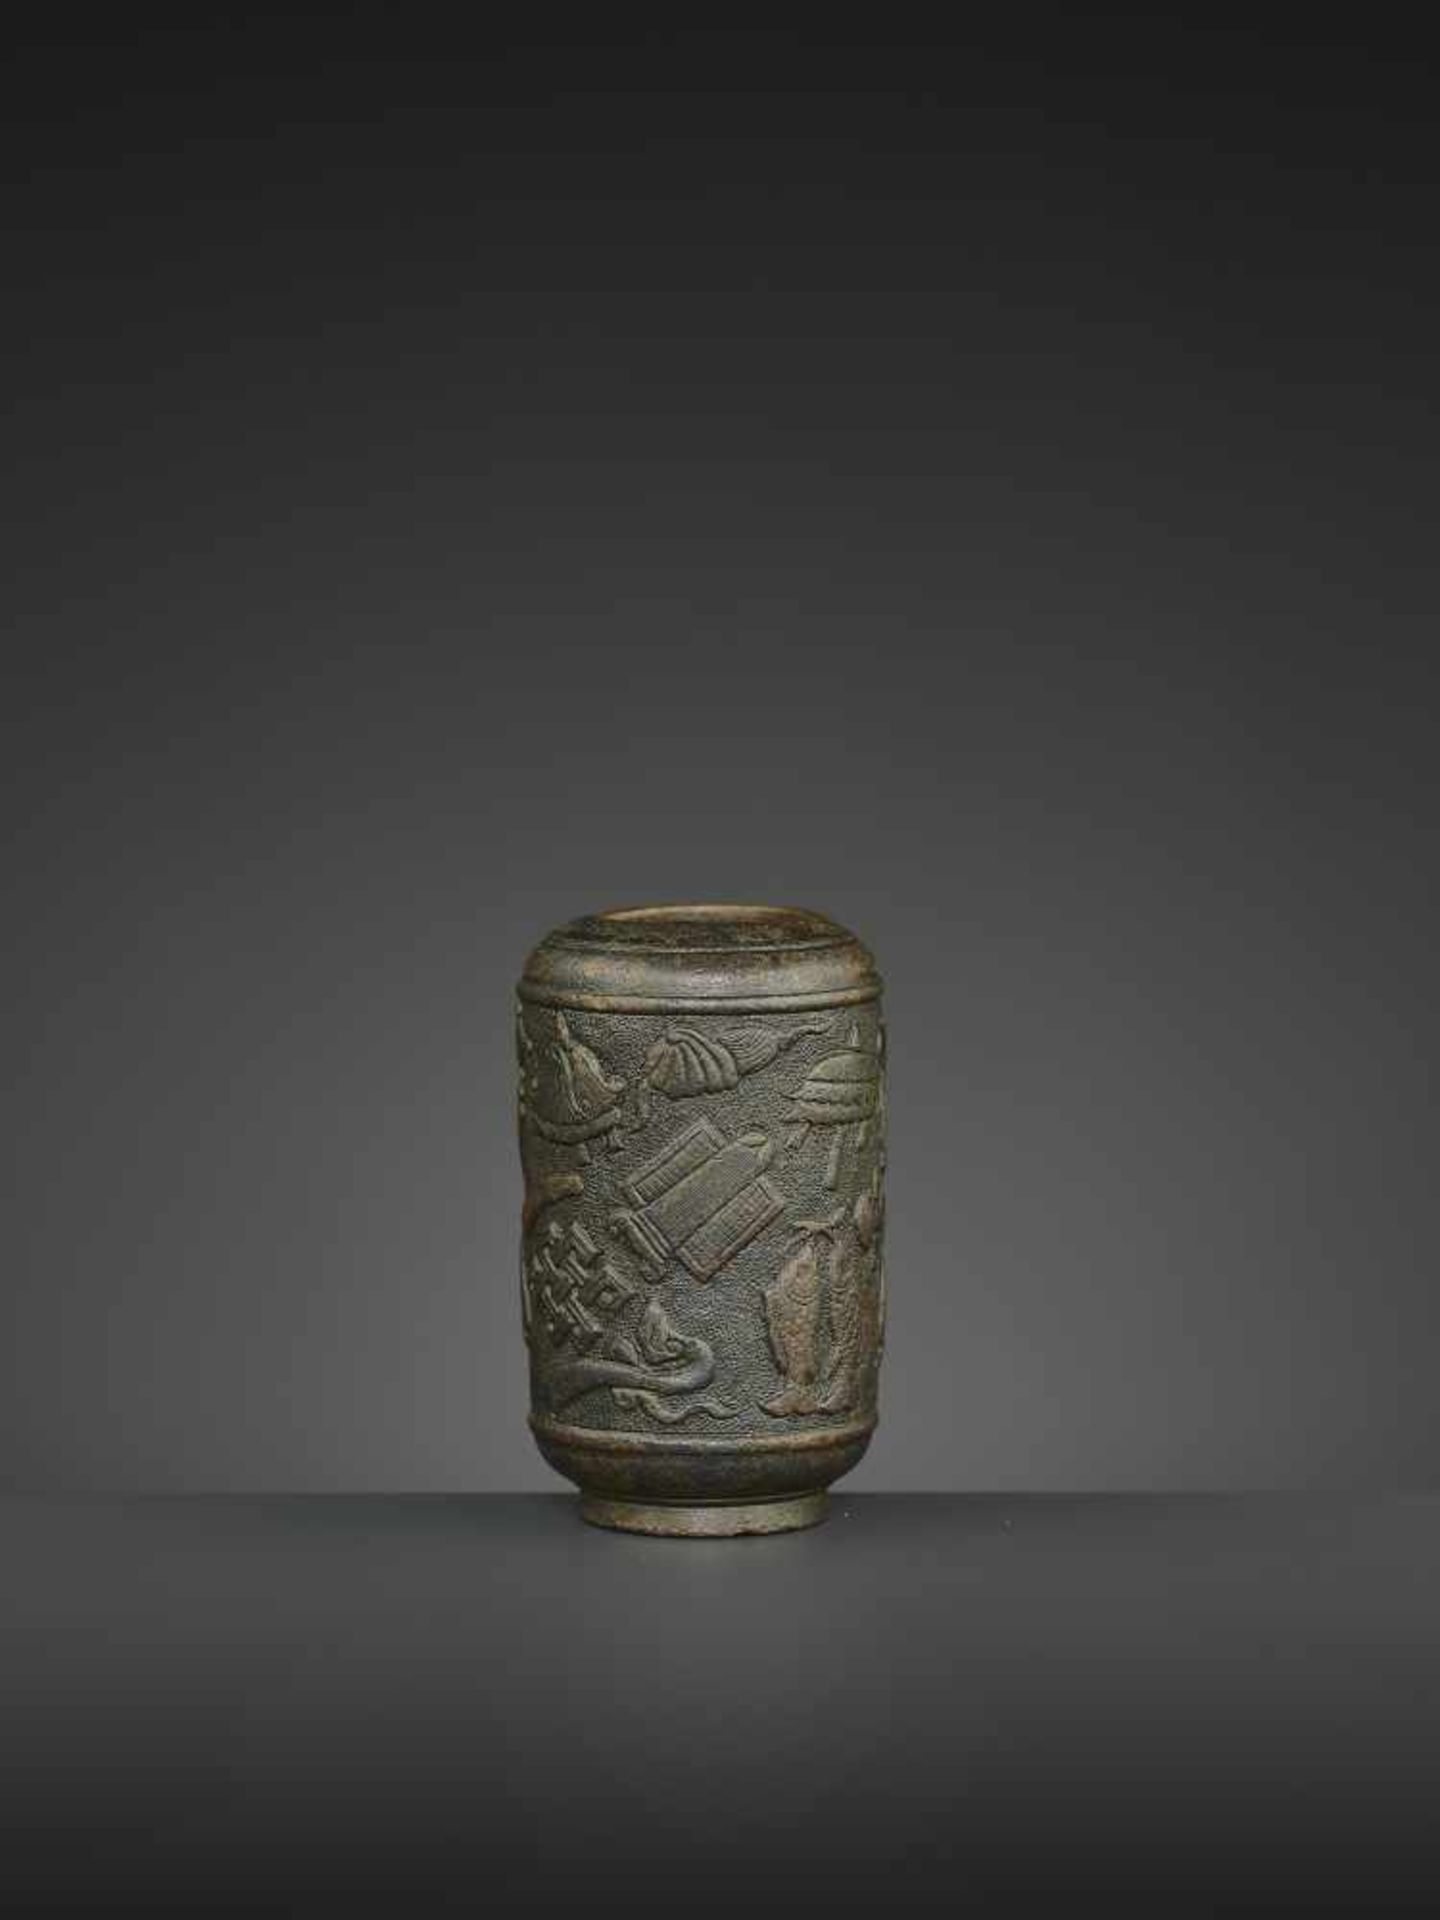 A HU WENMING BRONZE VASE, BAJIXIANG China, Wanli period, 1573-1619. The vessel finely cast with